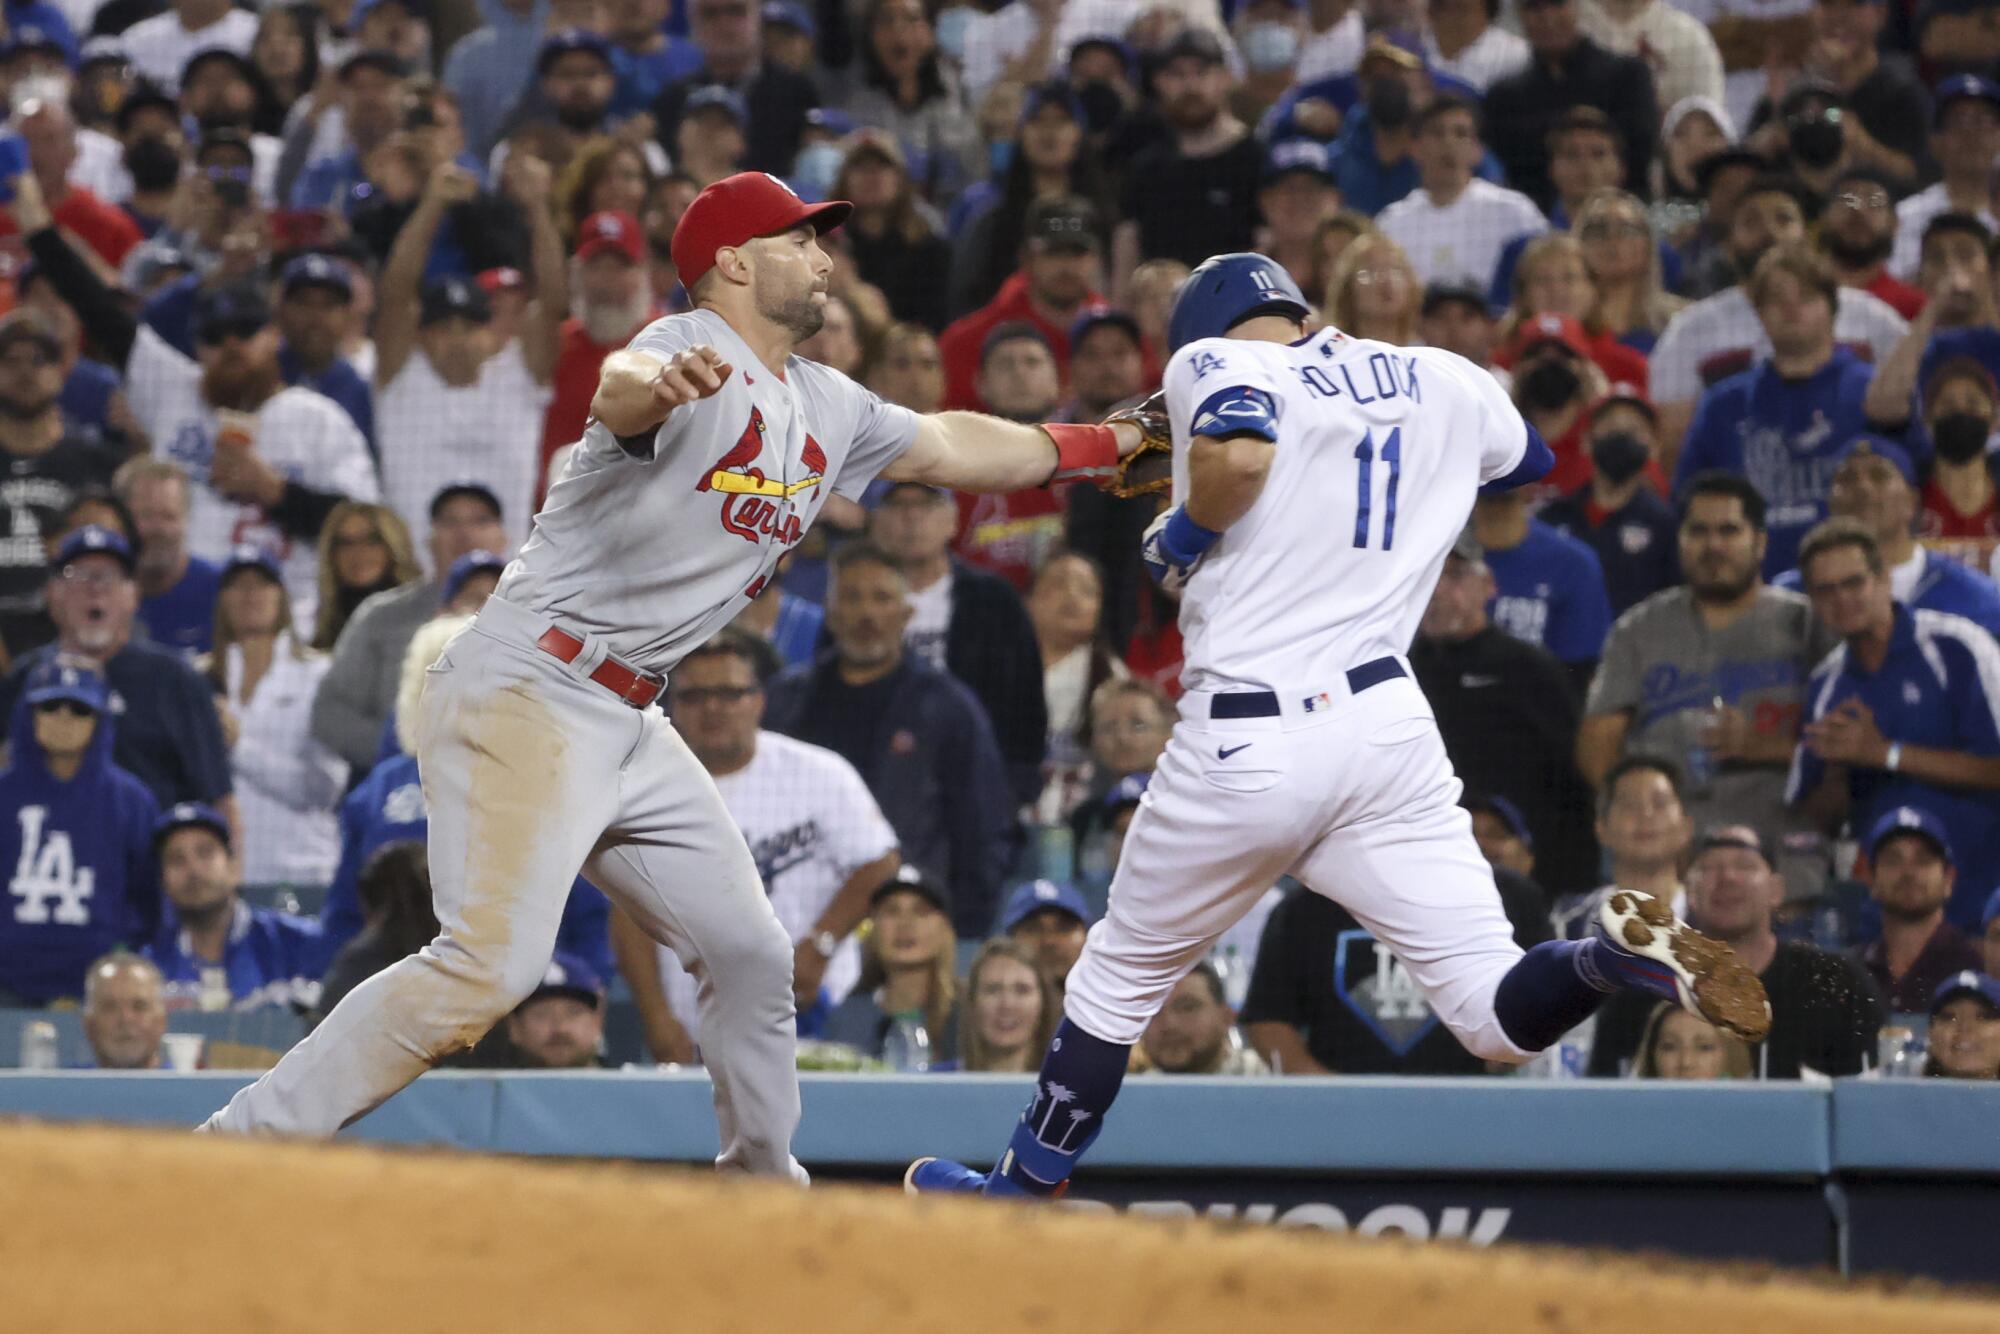 St. Louis Cardinals first baseman Paul Goldschmidt tags out Los Angeles Dodgers' AJ Pollock at first base